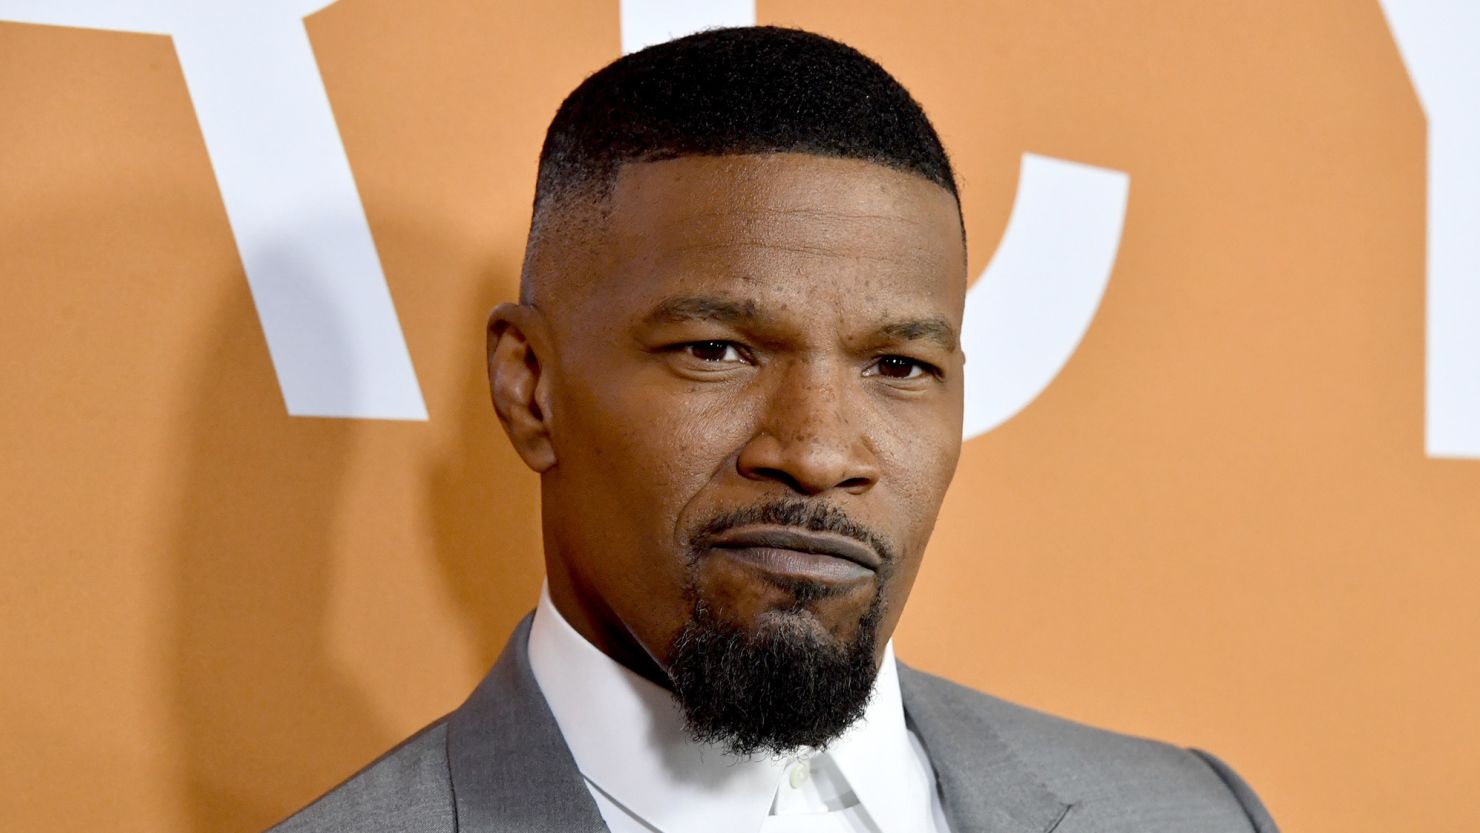 LOS ANGELES, CALIFORNIA - JANUARY 06:Jamie Foxx attends the LA Community Screening Of Warner Bros Pictures' "Just Mercy" at Cinemark Baldwin Hills on January 06, 2020 in Los Angeles, California. (Photo by Frazer Harrison/Getty Images)